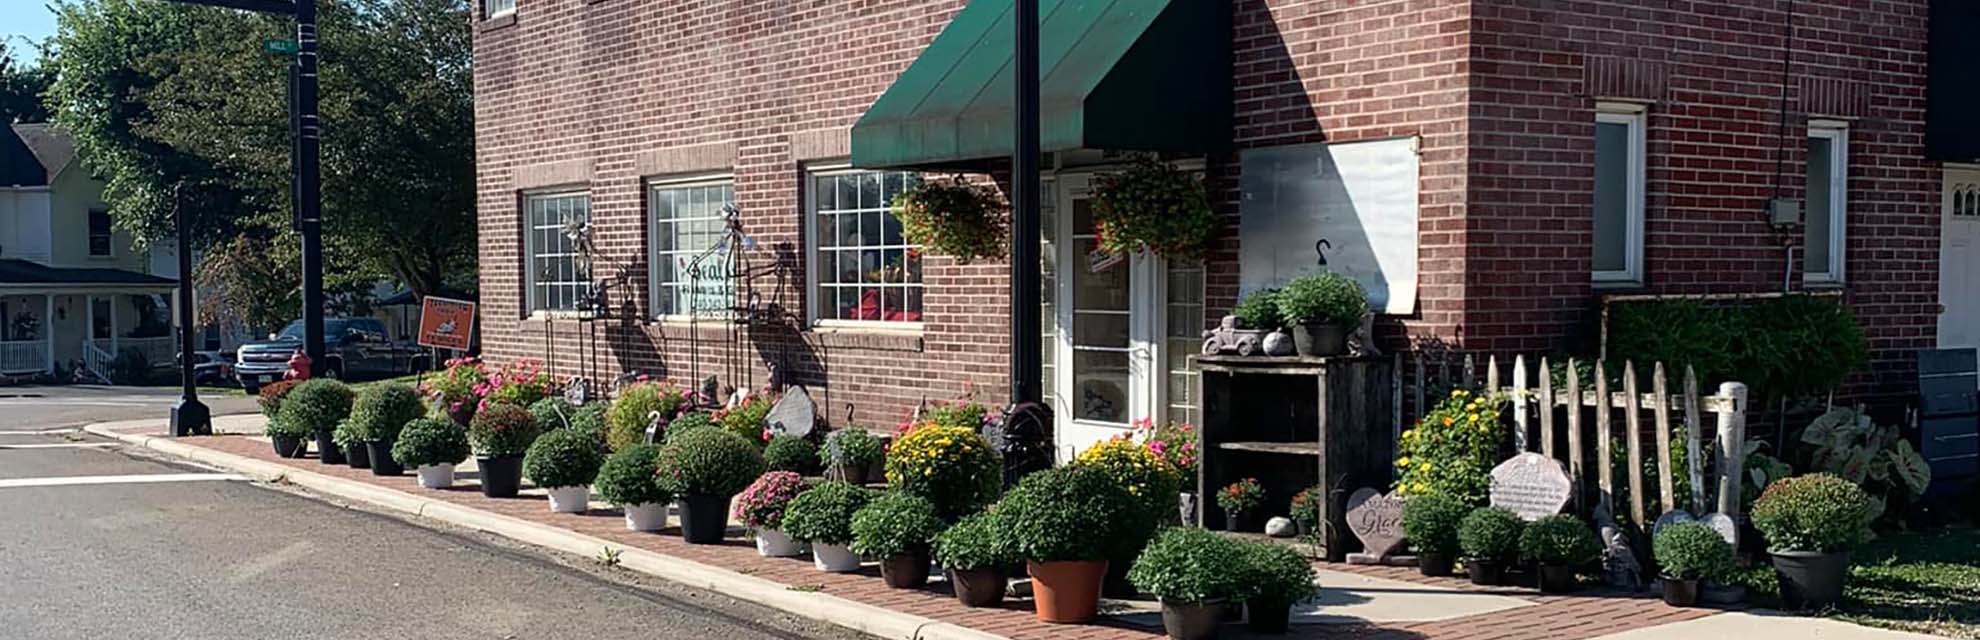 Red brick storefront with green awning entrance and a variety of large plants lining the sidewalk at Seals Flowers & Gifts in New Lexington, Perry County, Ohio.